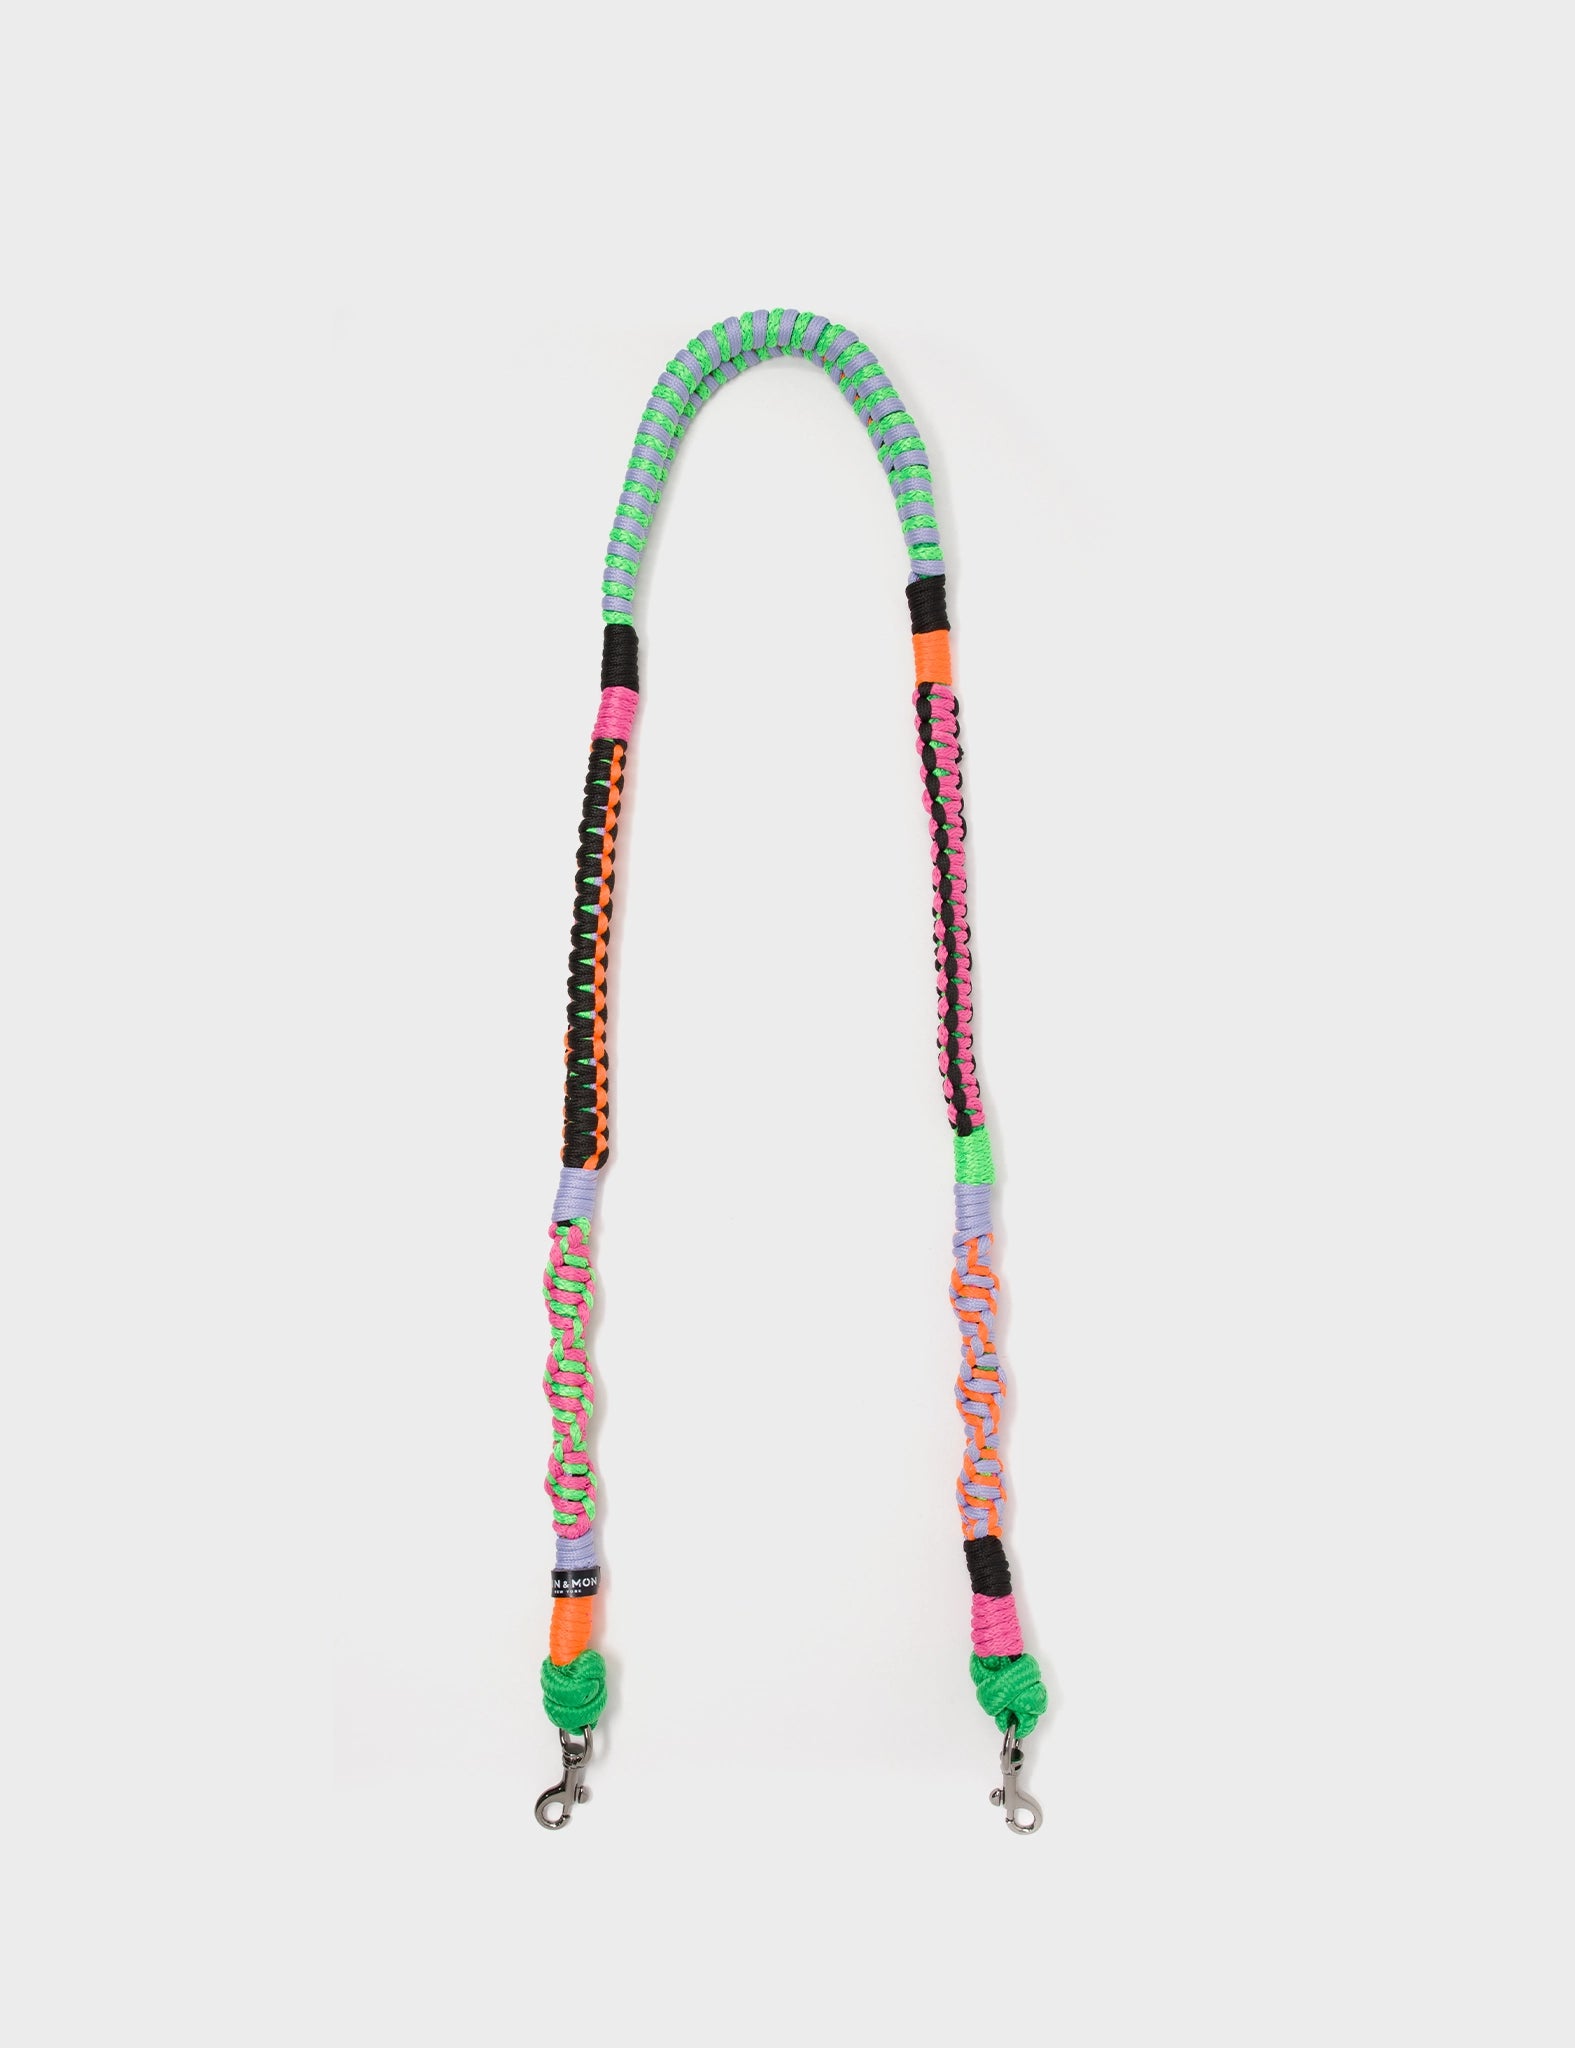 Interchangeable Handwoven Shoulder Strap - Biscay Green and Neon Colors - Top